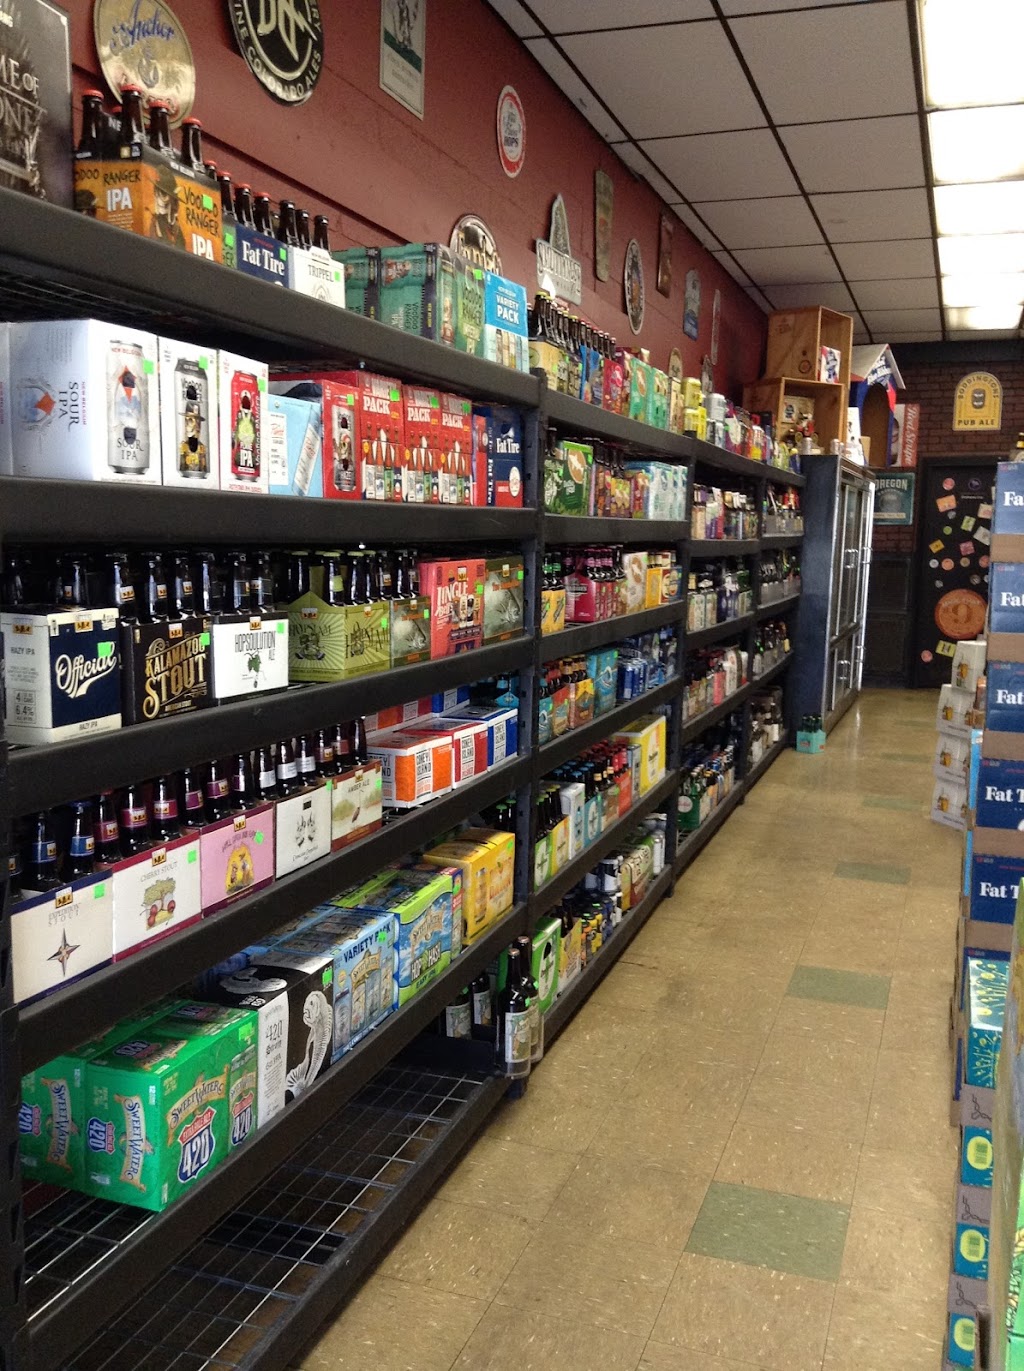 Party Beverages Inc. | 71 N Plank Rd, Newburgh, NY 12550 | Phone: (845) 565-3039